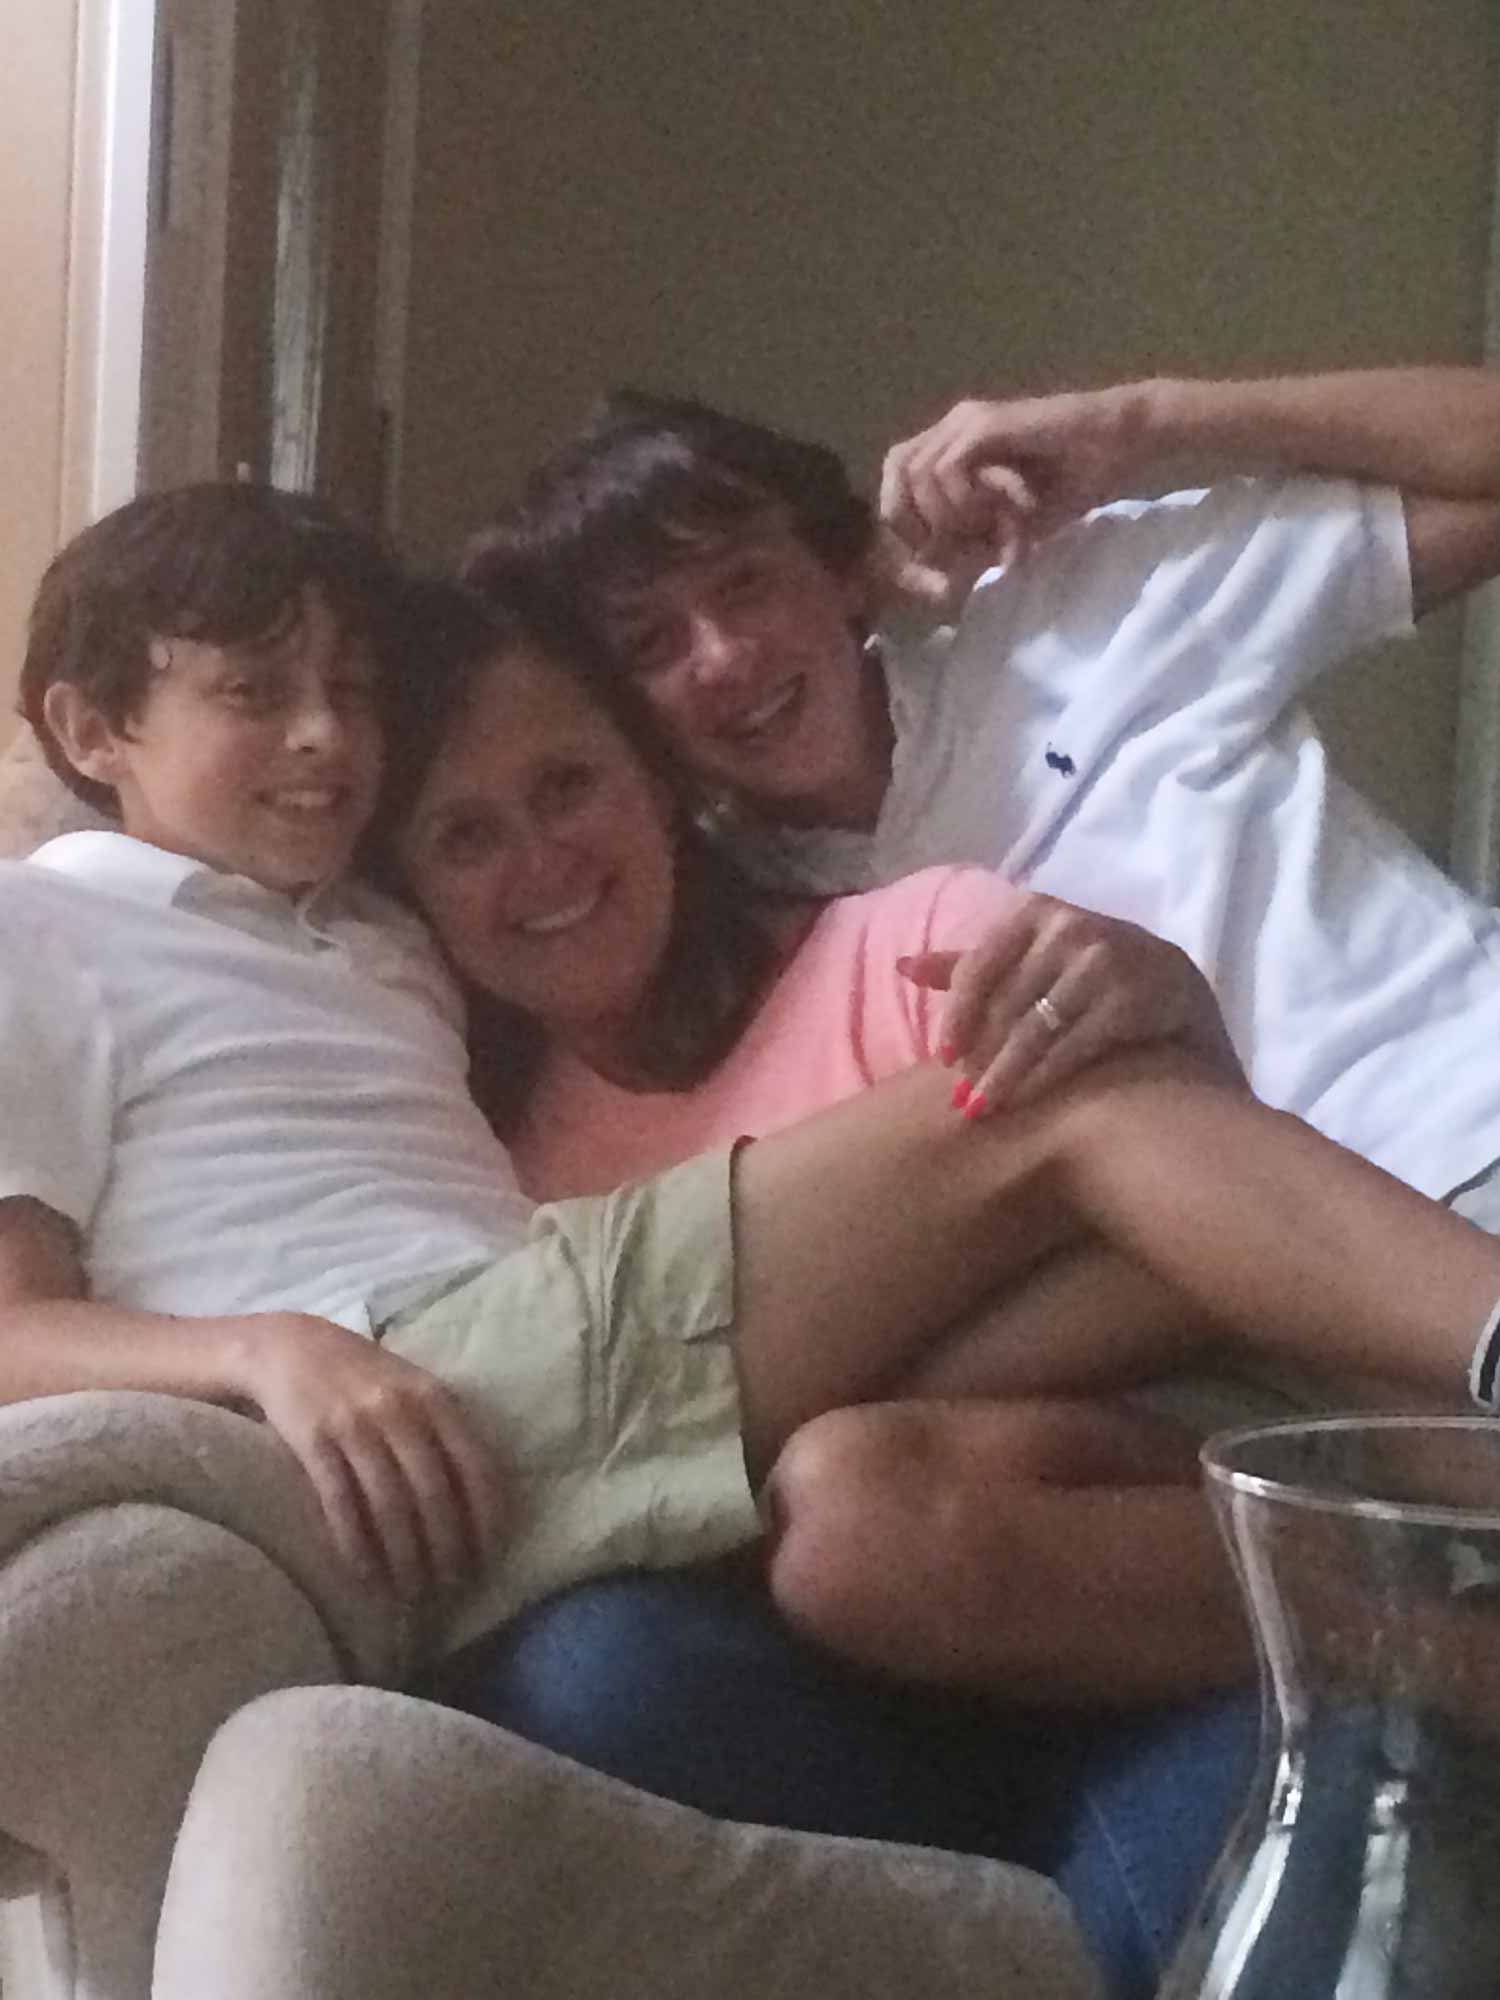 Zach with mother and brother on chair